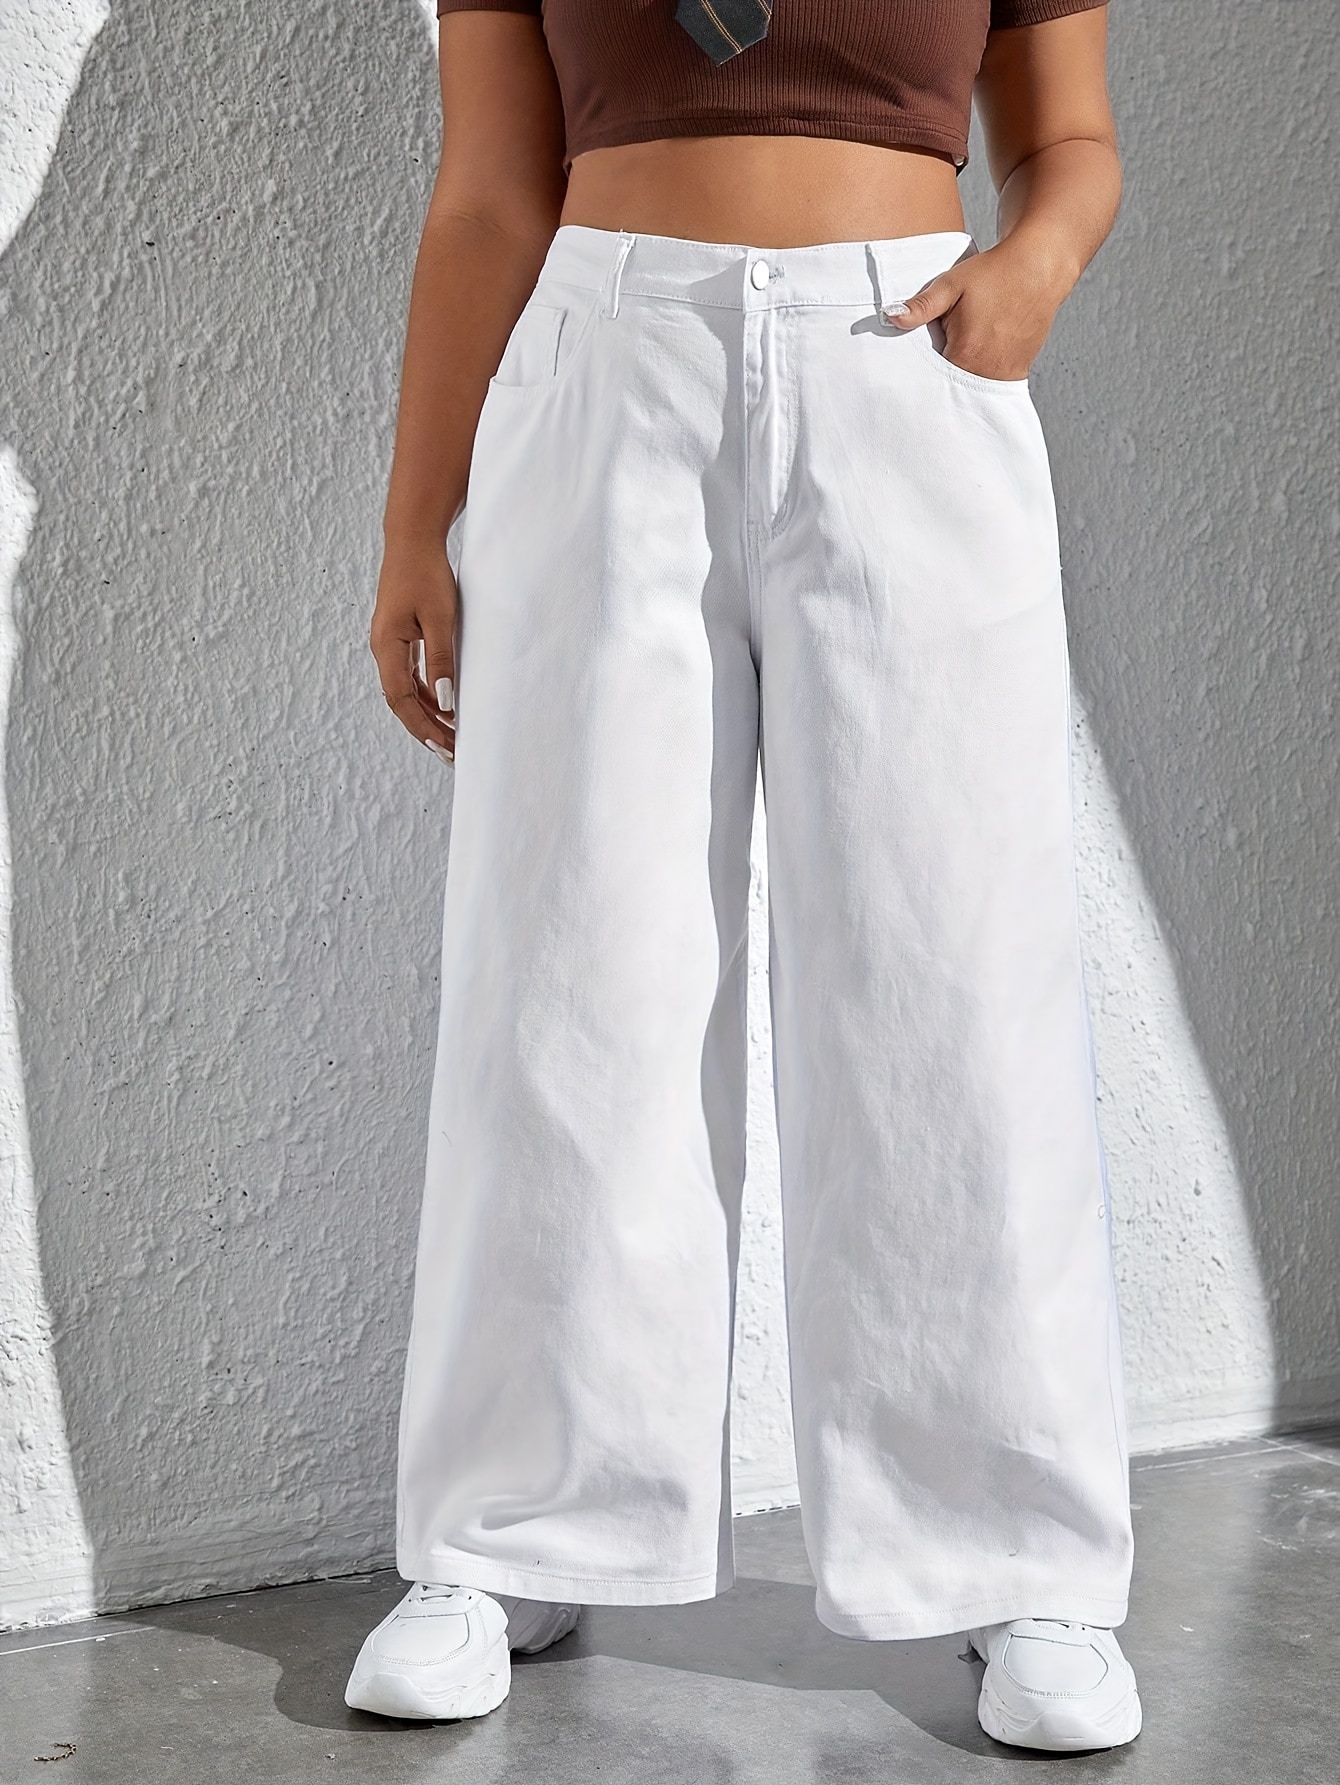 Express High Waisted White Ripped Wide Leg Palazzo Jeans, Women's Size:6  Short